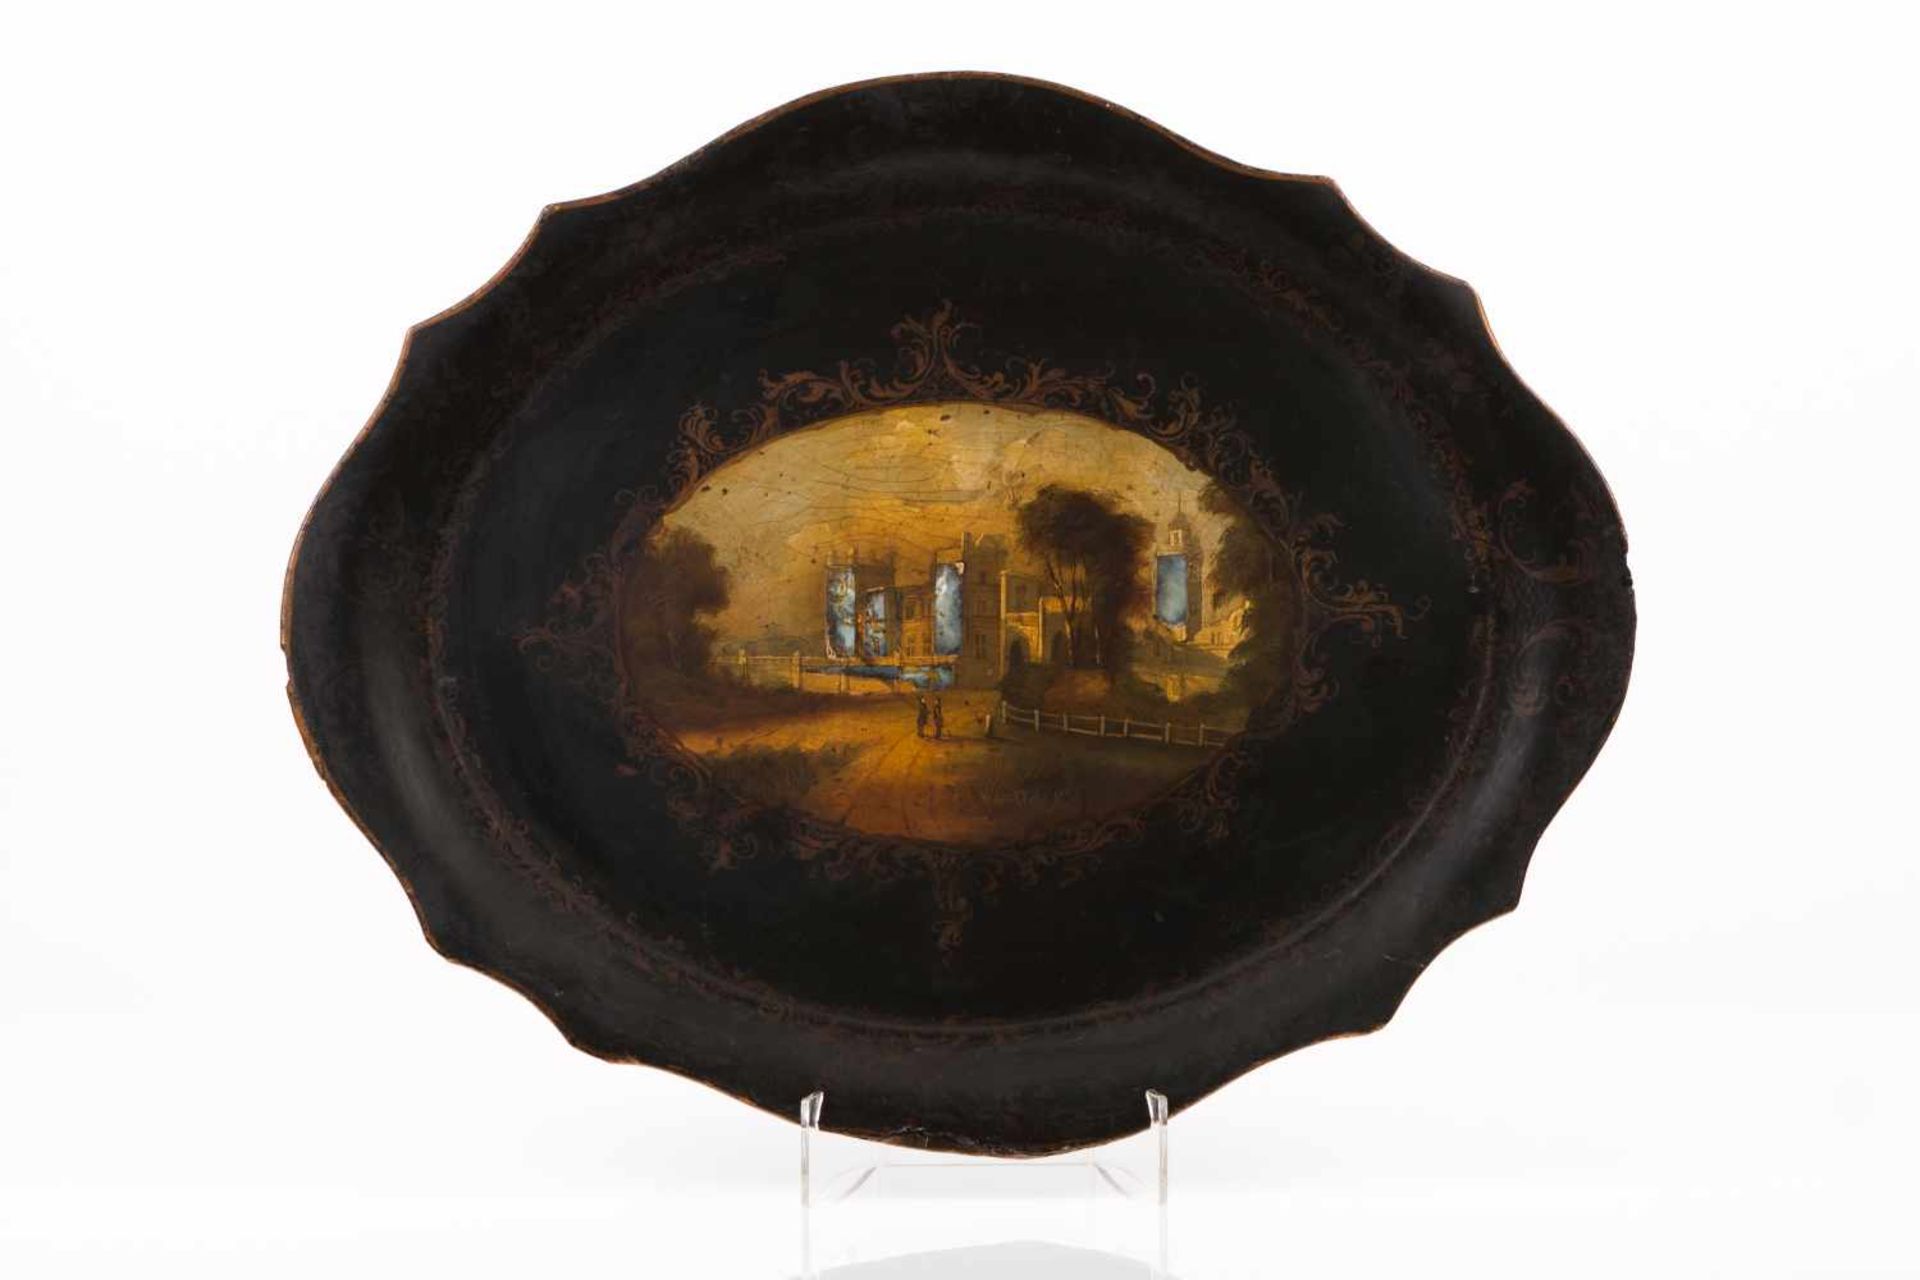 A scalloped trayLacquerGilt decoration with cartouche at the centre depicting landscape with